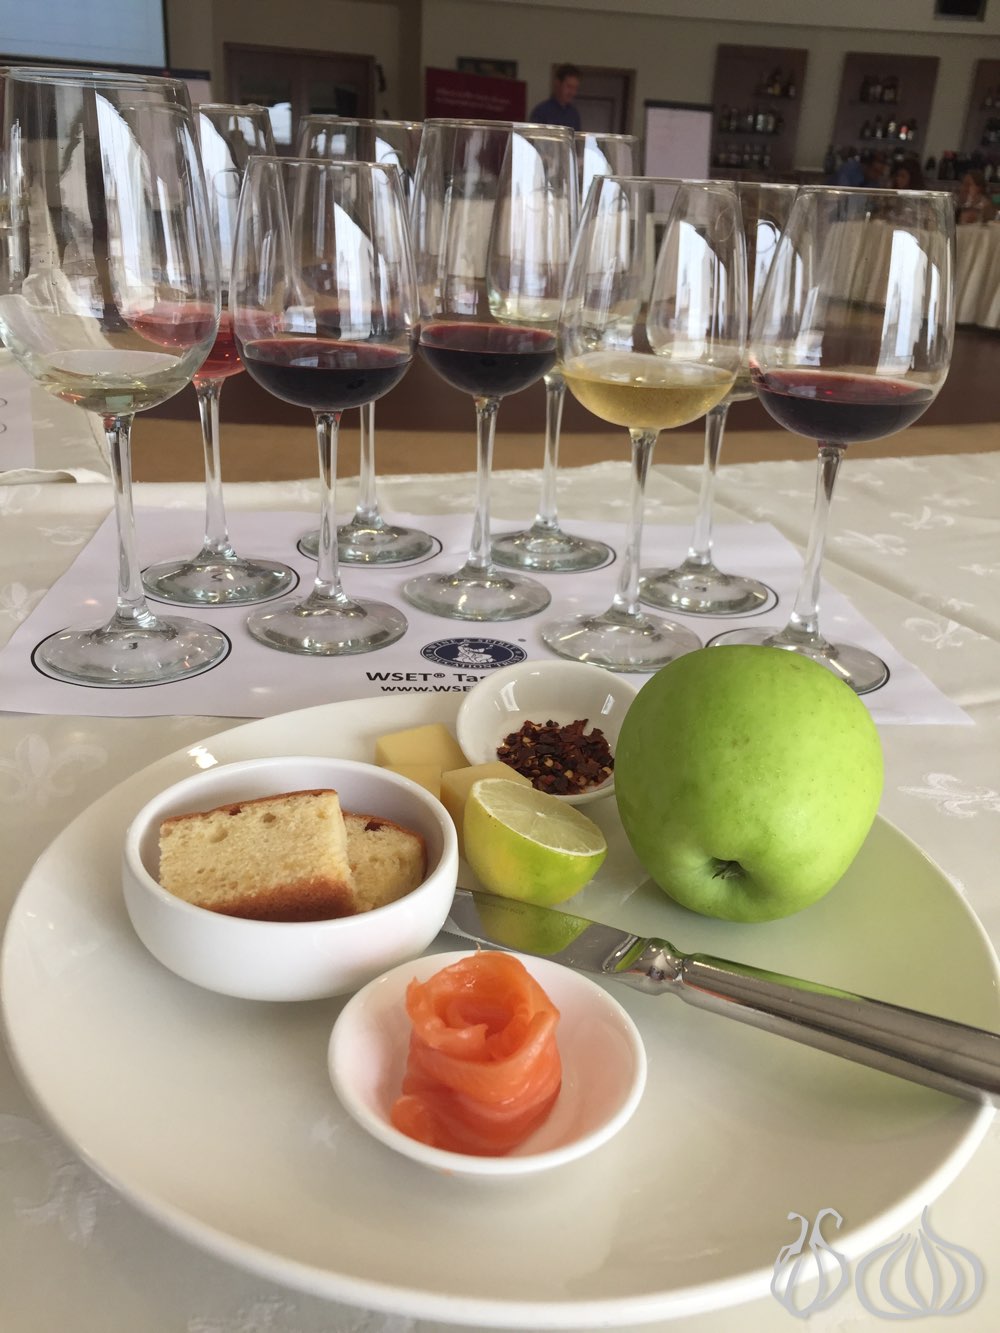 wset-wine-course-beirut132015-11-21-06-52-16